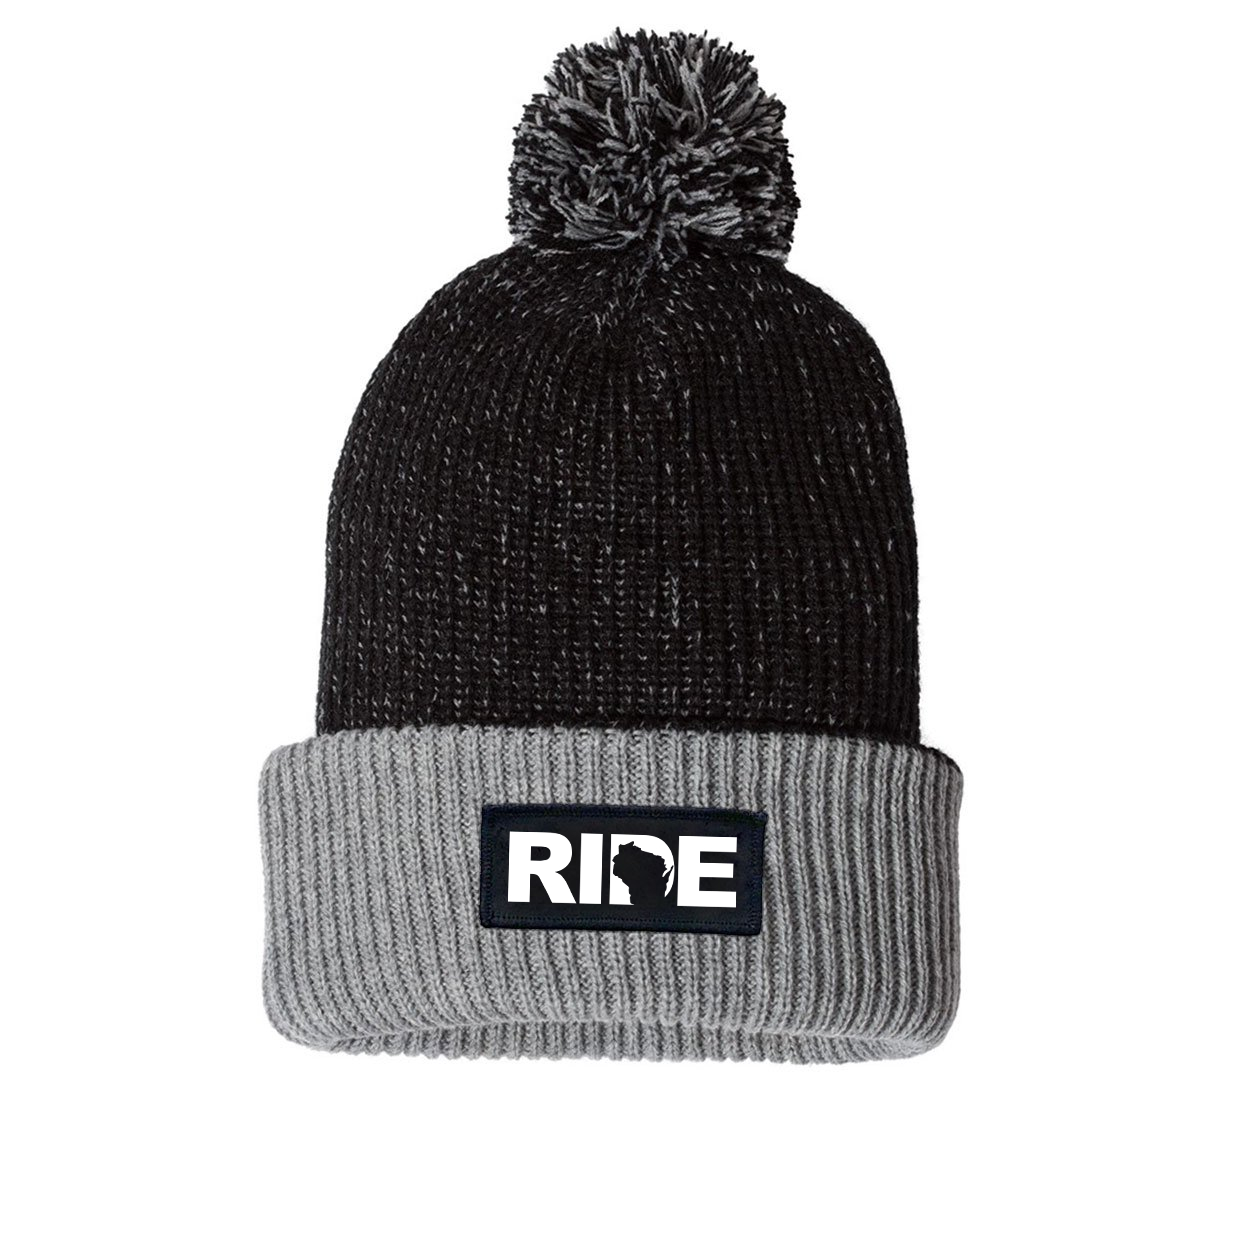 Ride Wisconsin Night Out Woven Patch Roll Up Pom Knit Beanie Black/Gray (White Logo)